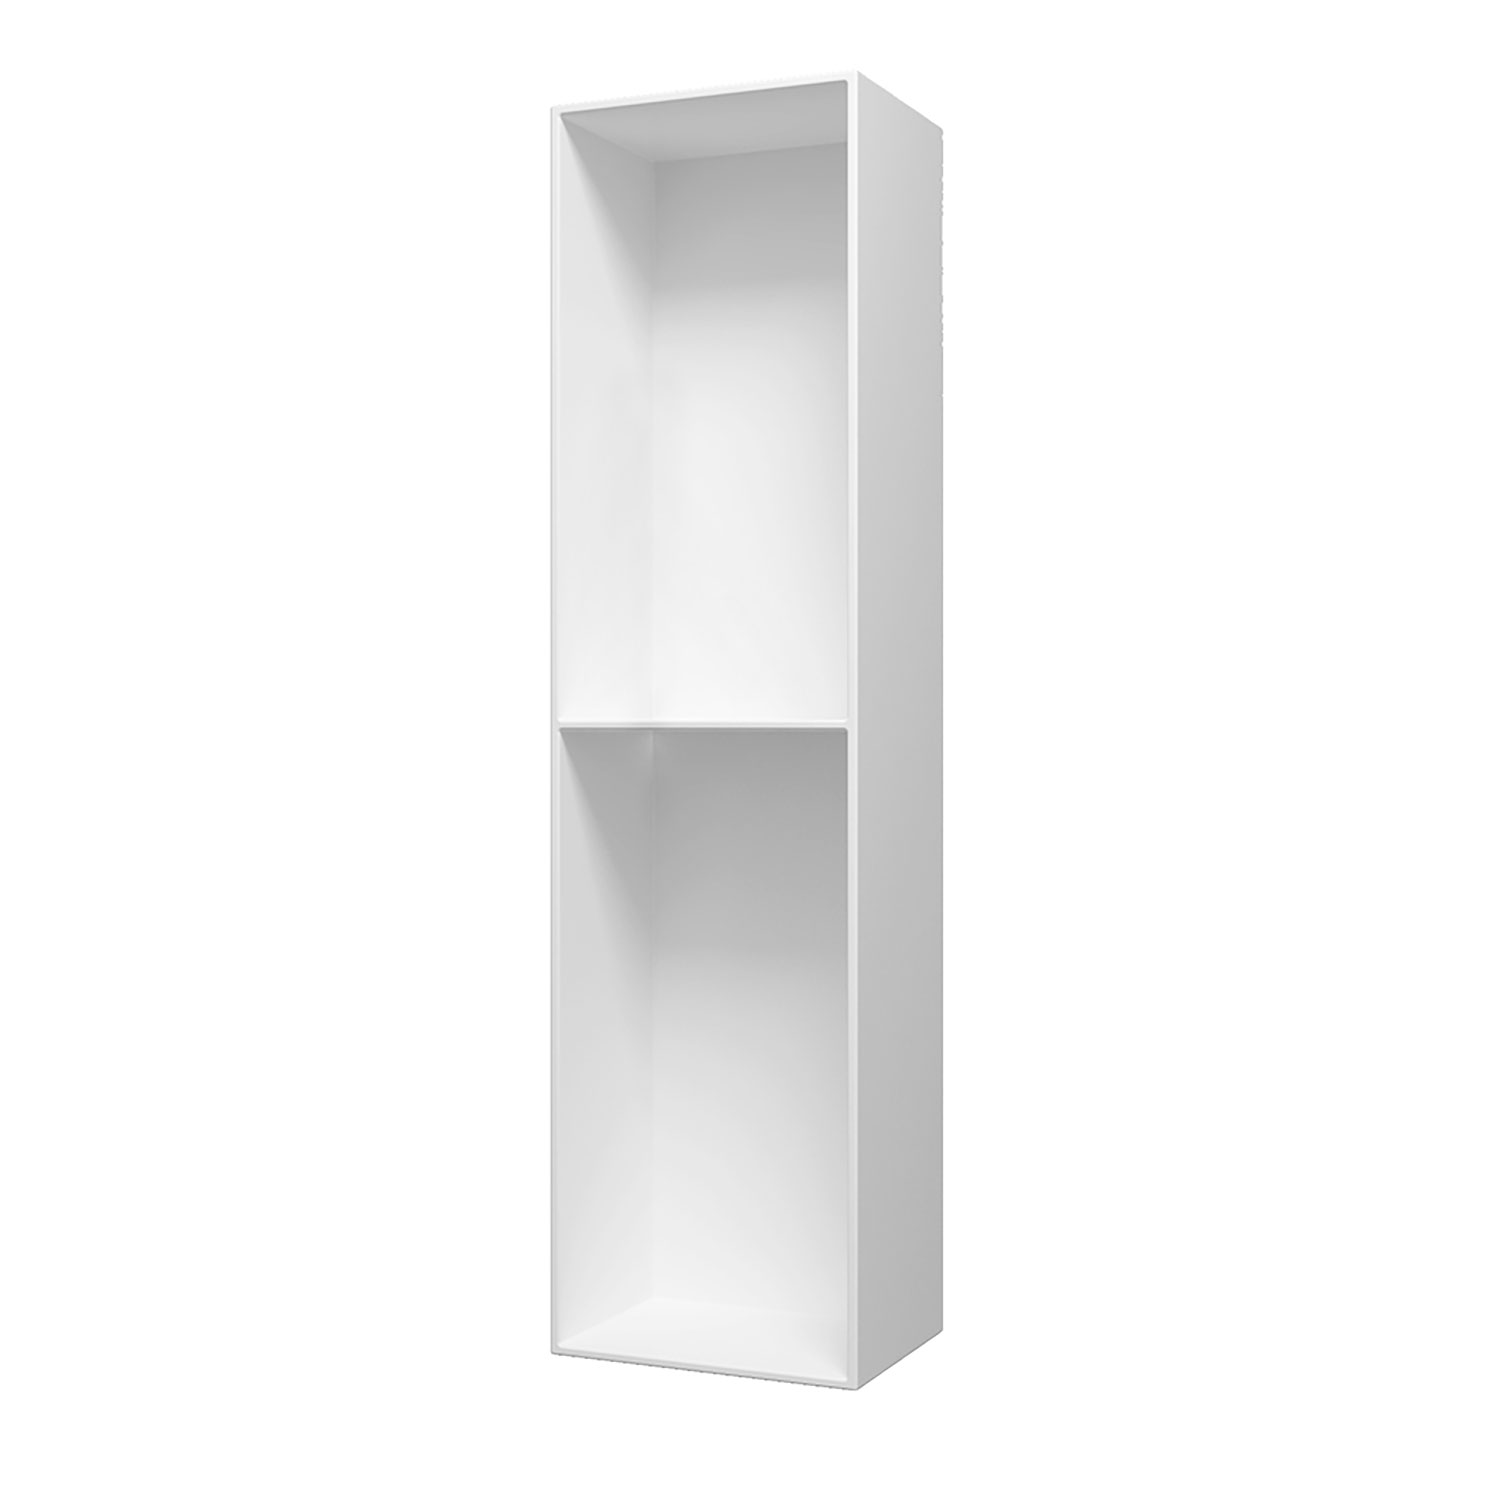 Wall cabinet 30